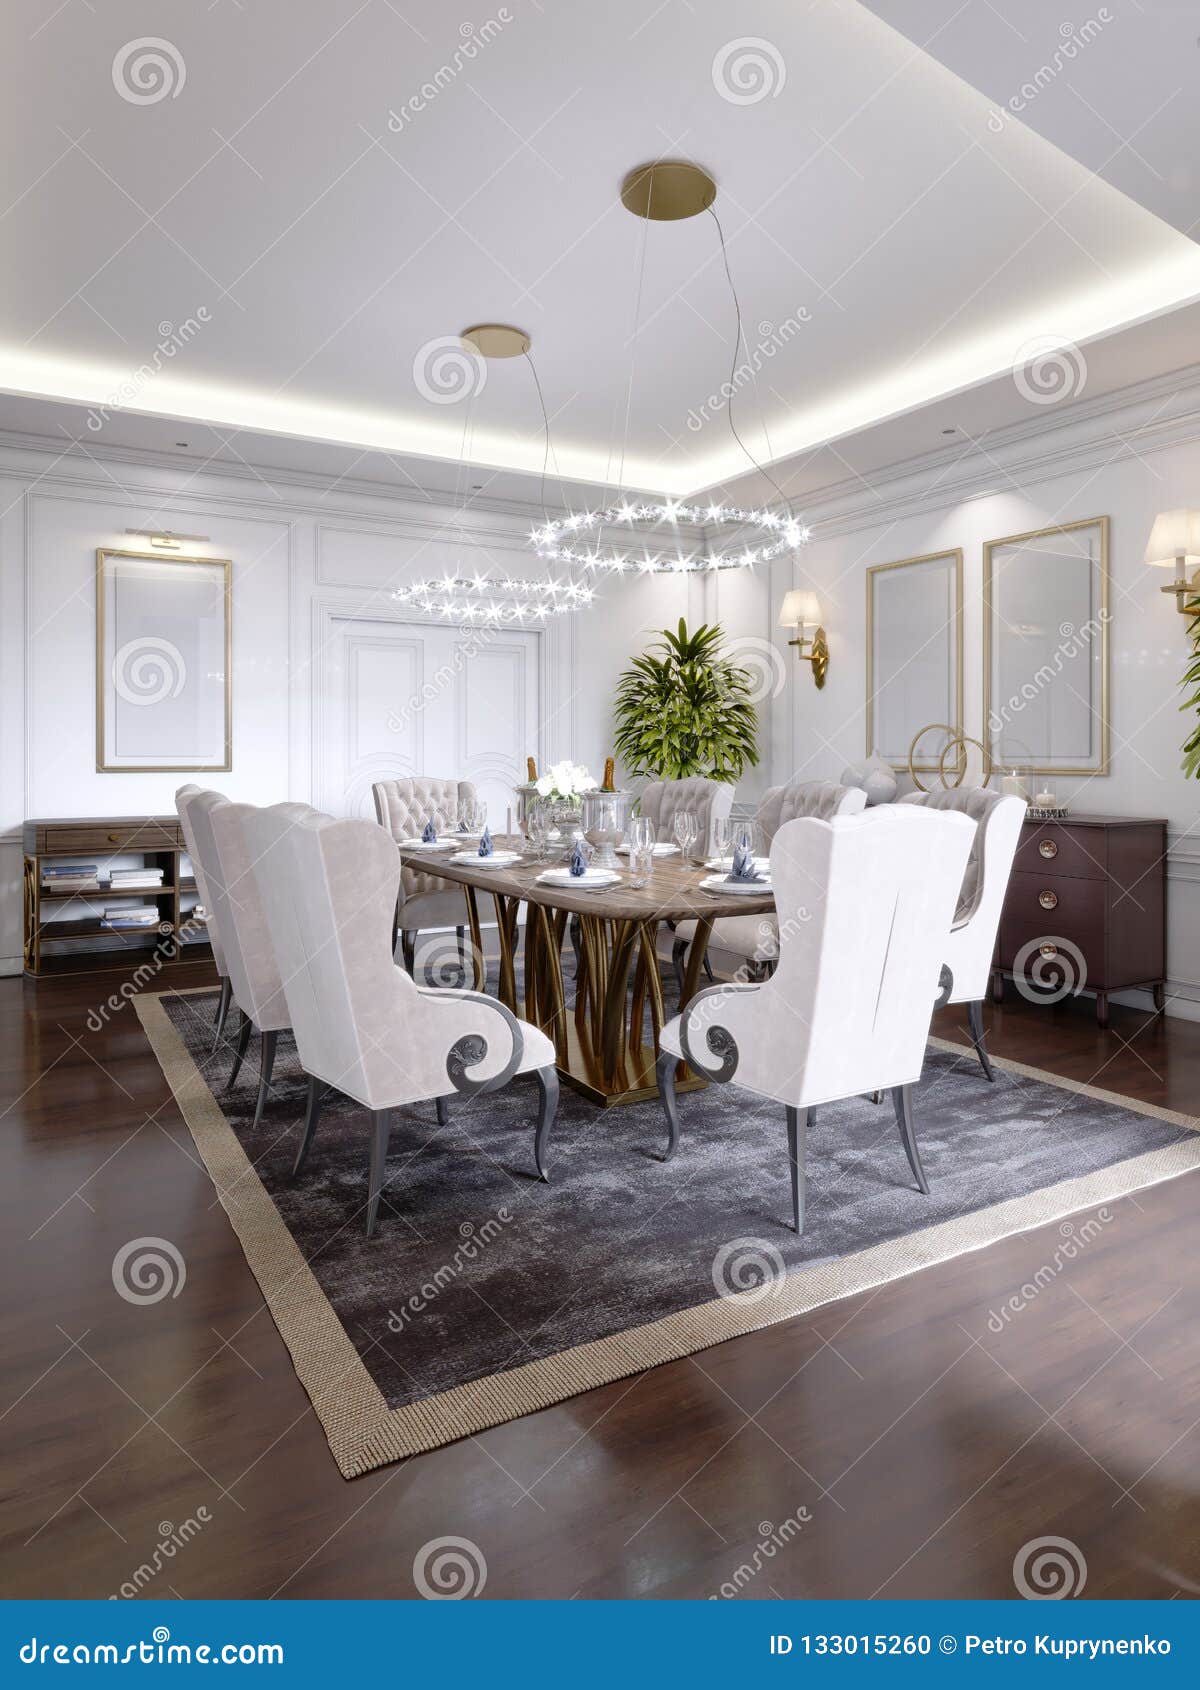 Luxurious Dining Room with a Large Table and Soft Chairs in a Classic ...